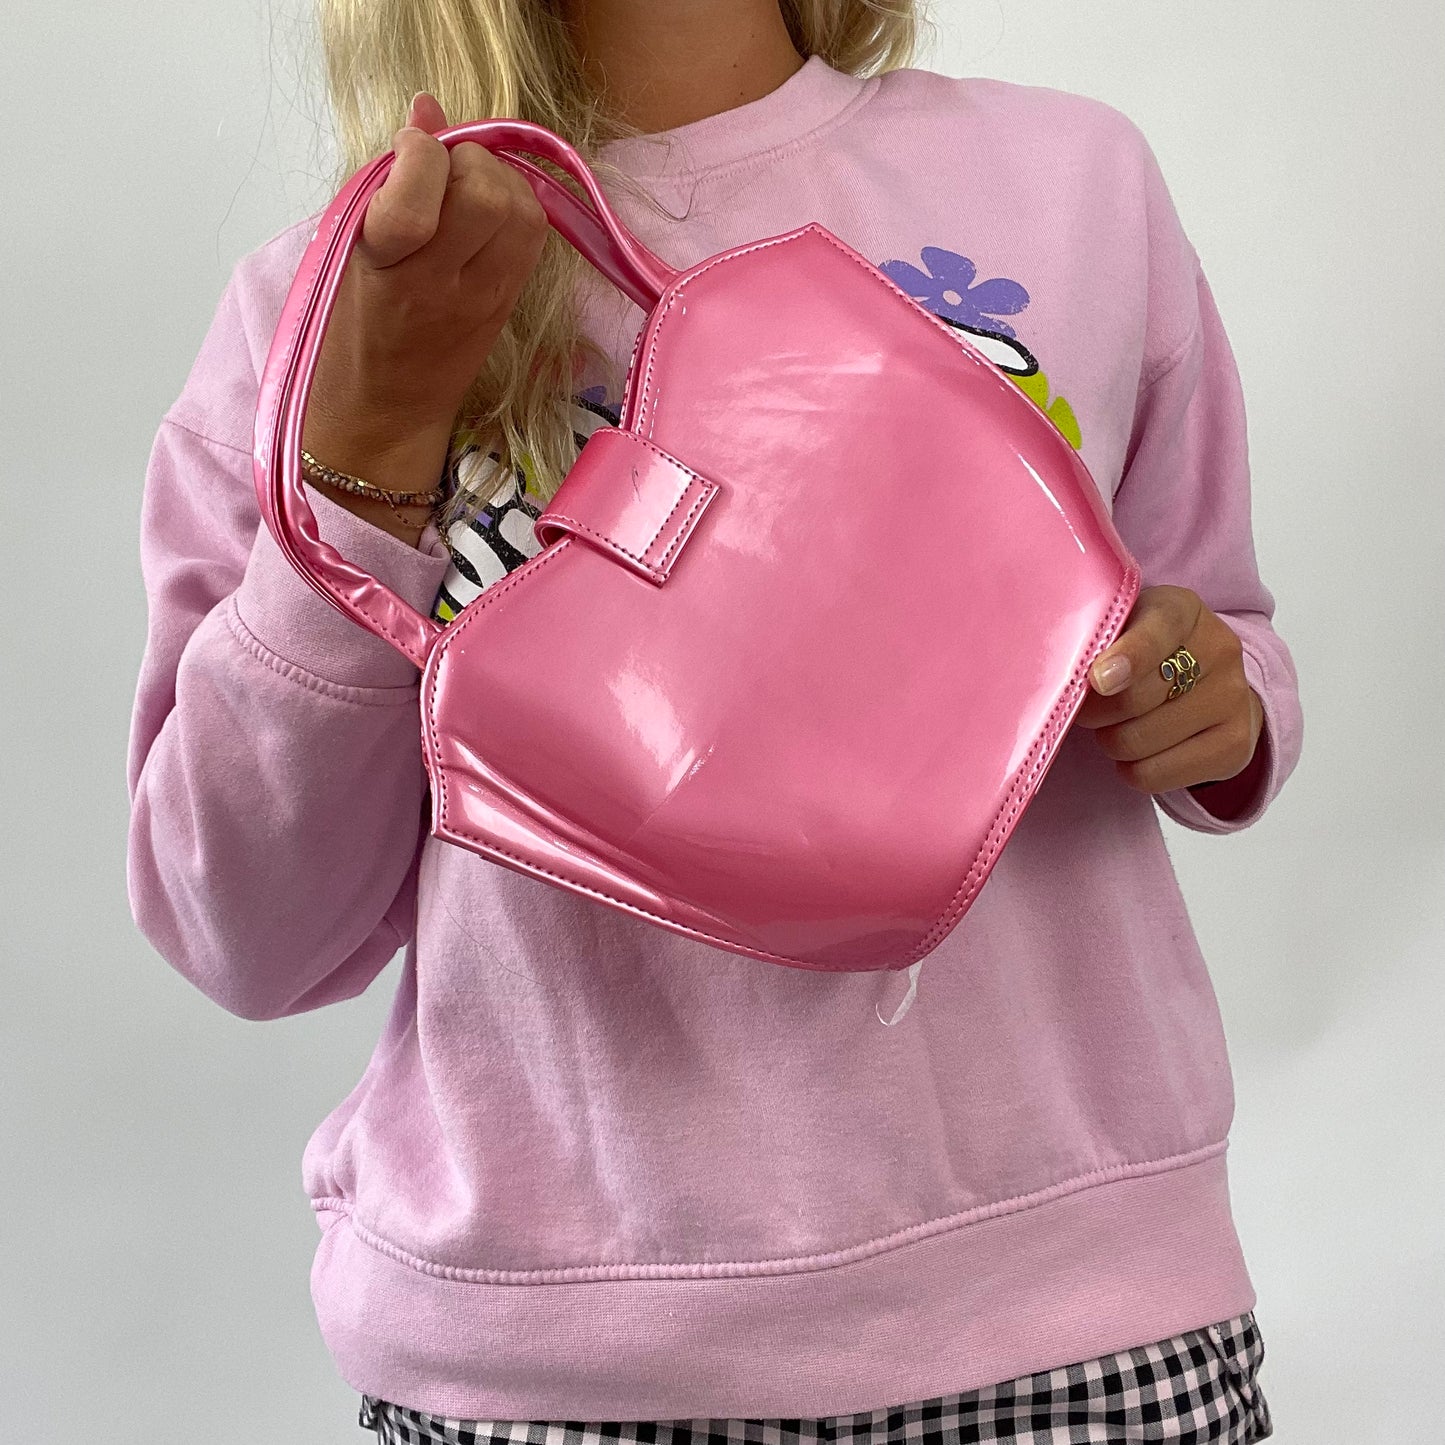 BARBIE DROP - college barbie | pink patterned bag with bow